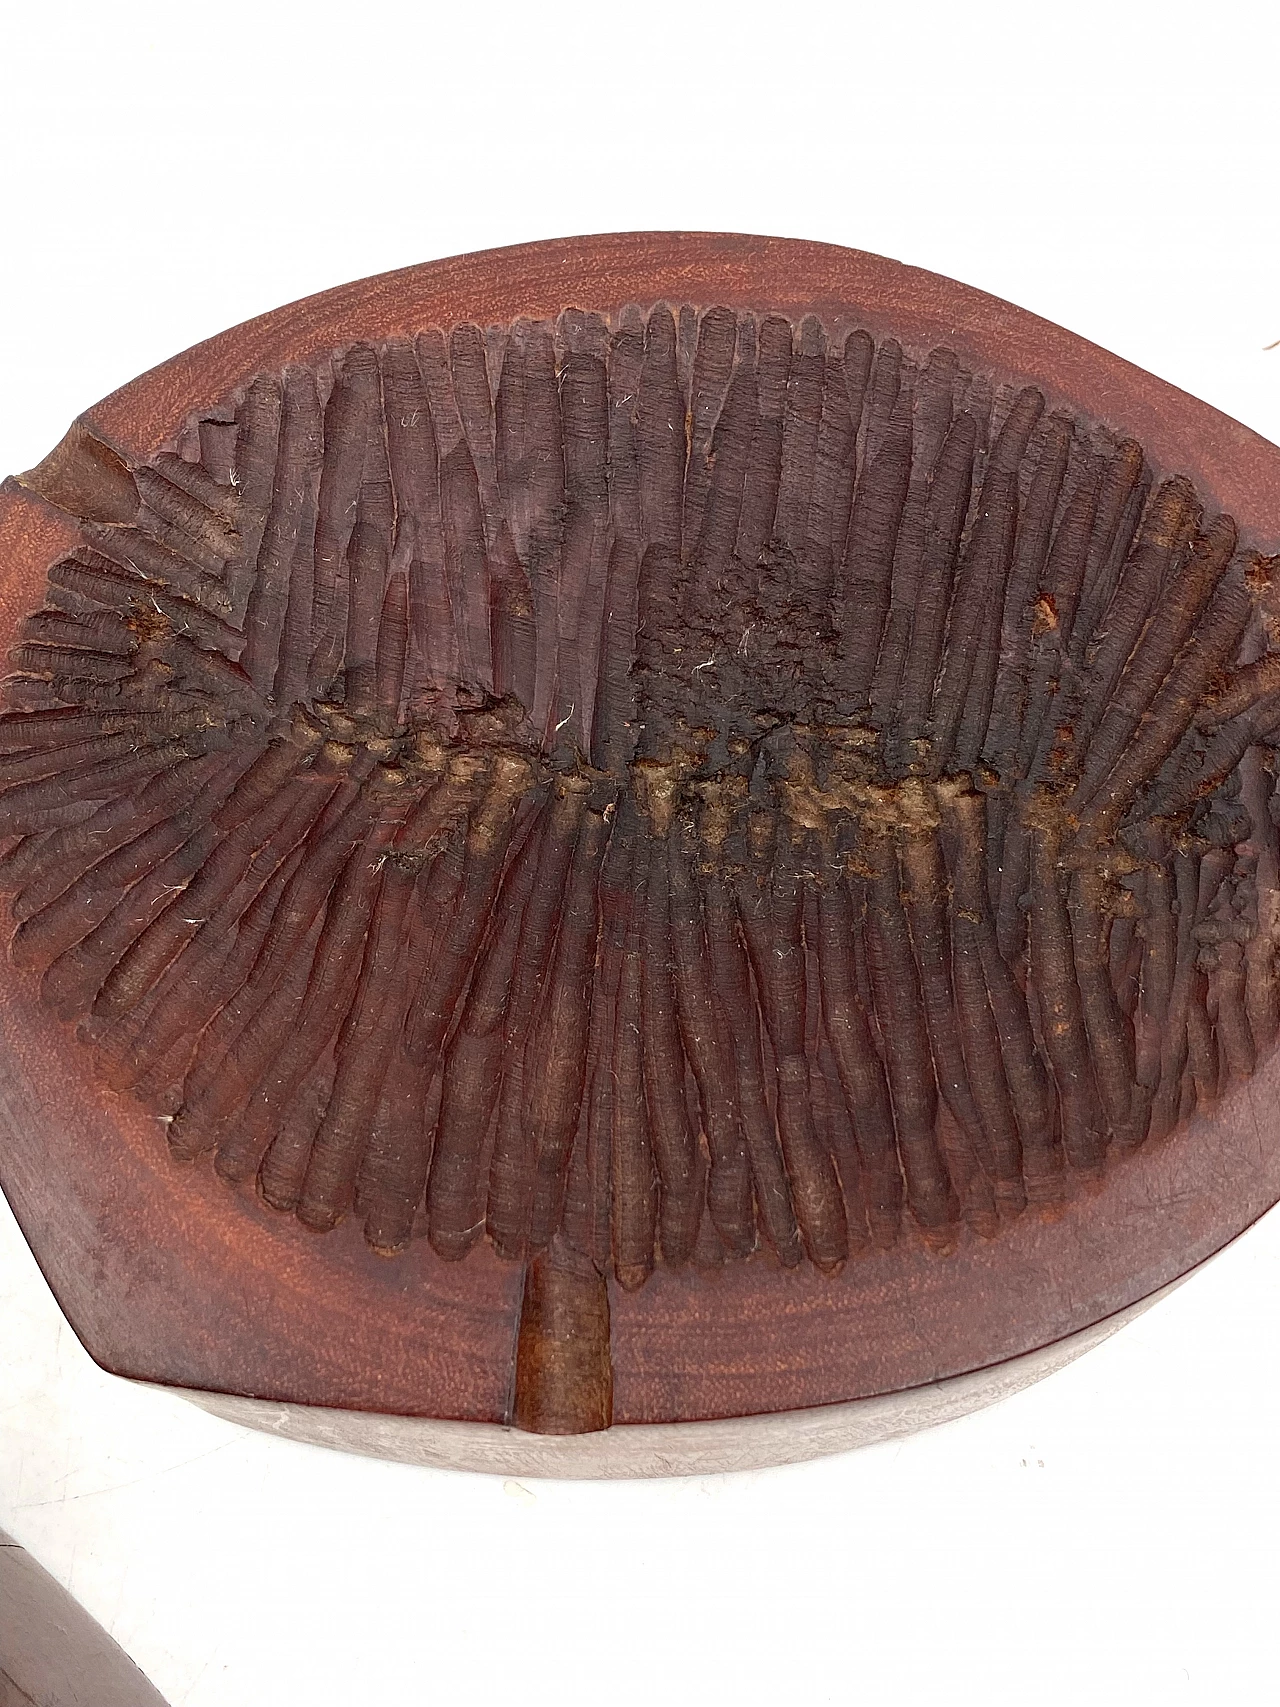 Pair of wooden ashtrays in Monique Gerber's style, 1970s 19